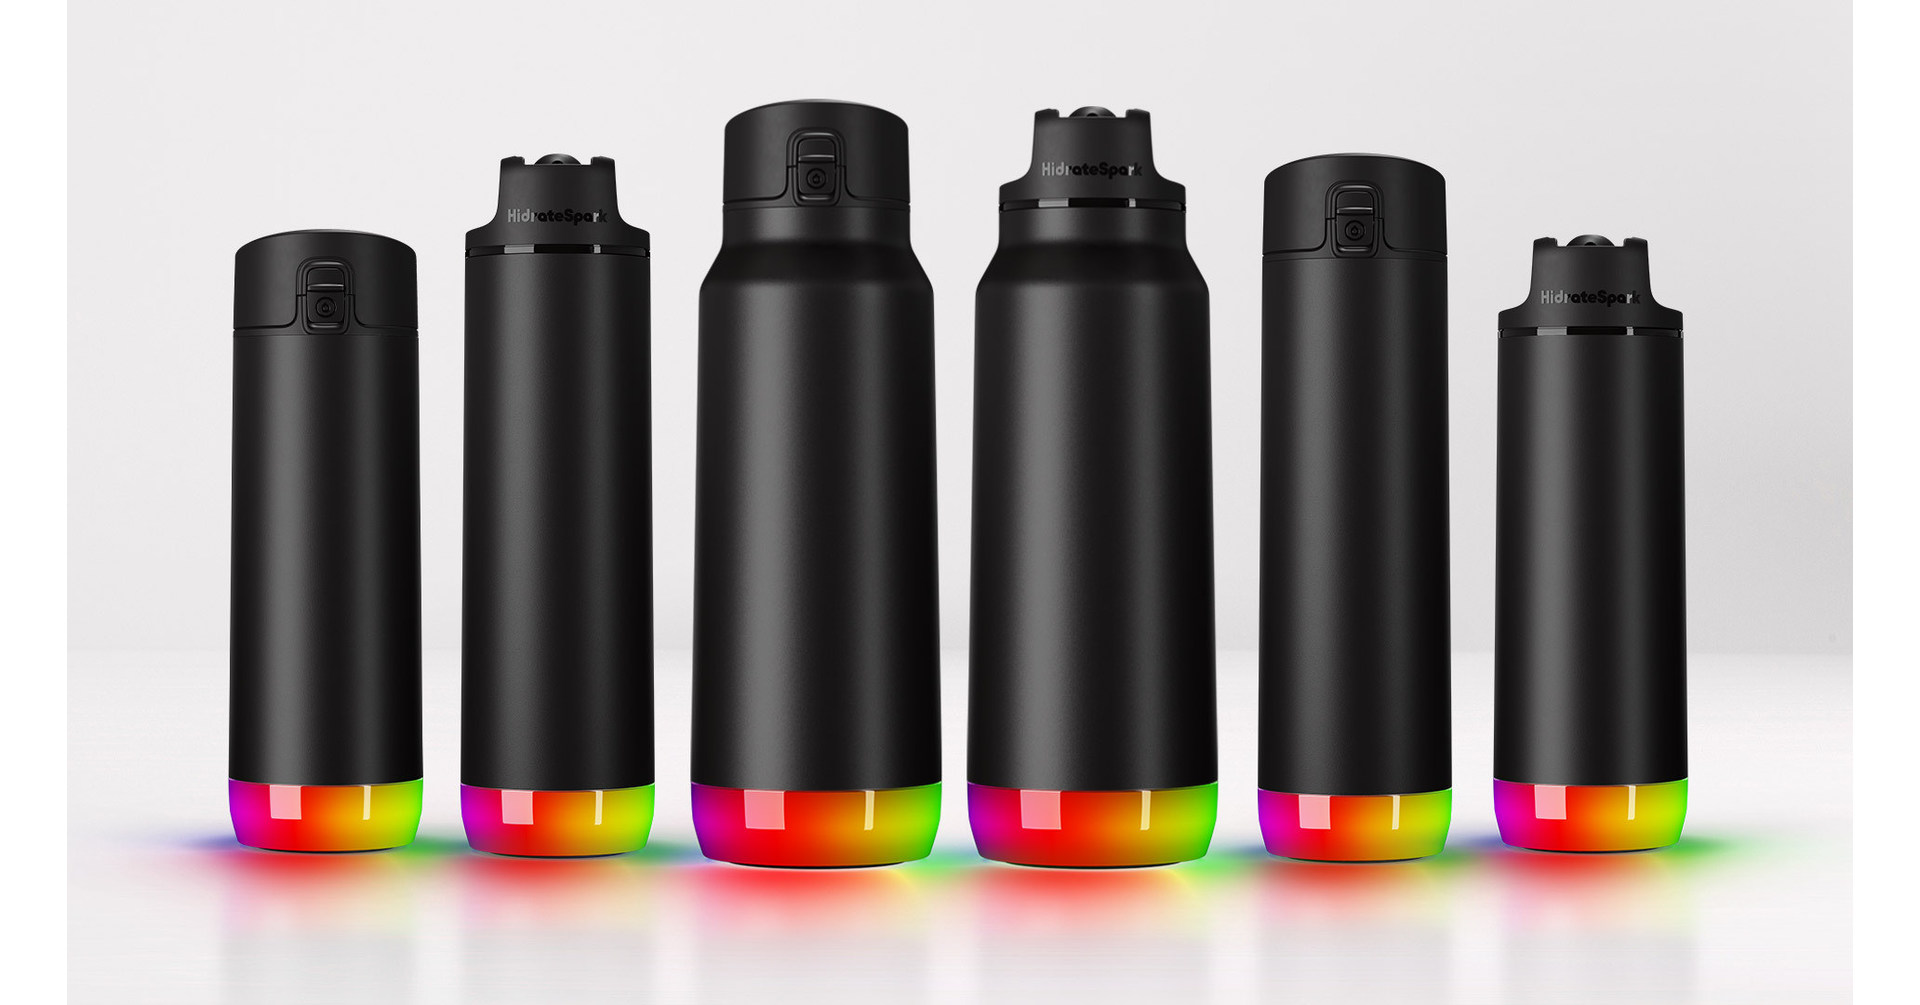 HidrateSpark Announces HidrateSpark PRO in 32oz - The Largest Smart Water Bottle Yet and The Most Advanced Stainless Steel Hydration Tracker Ever